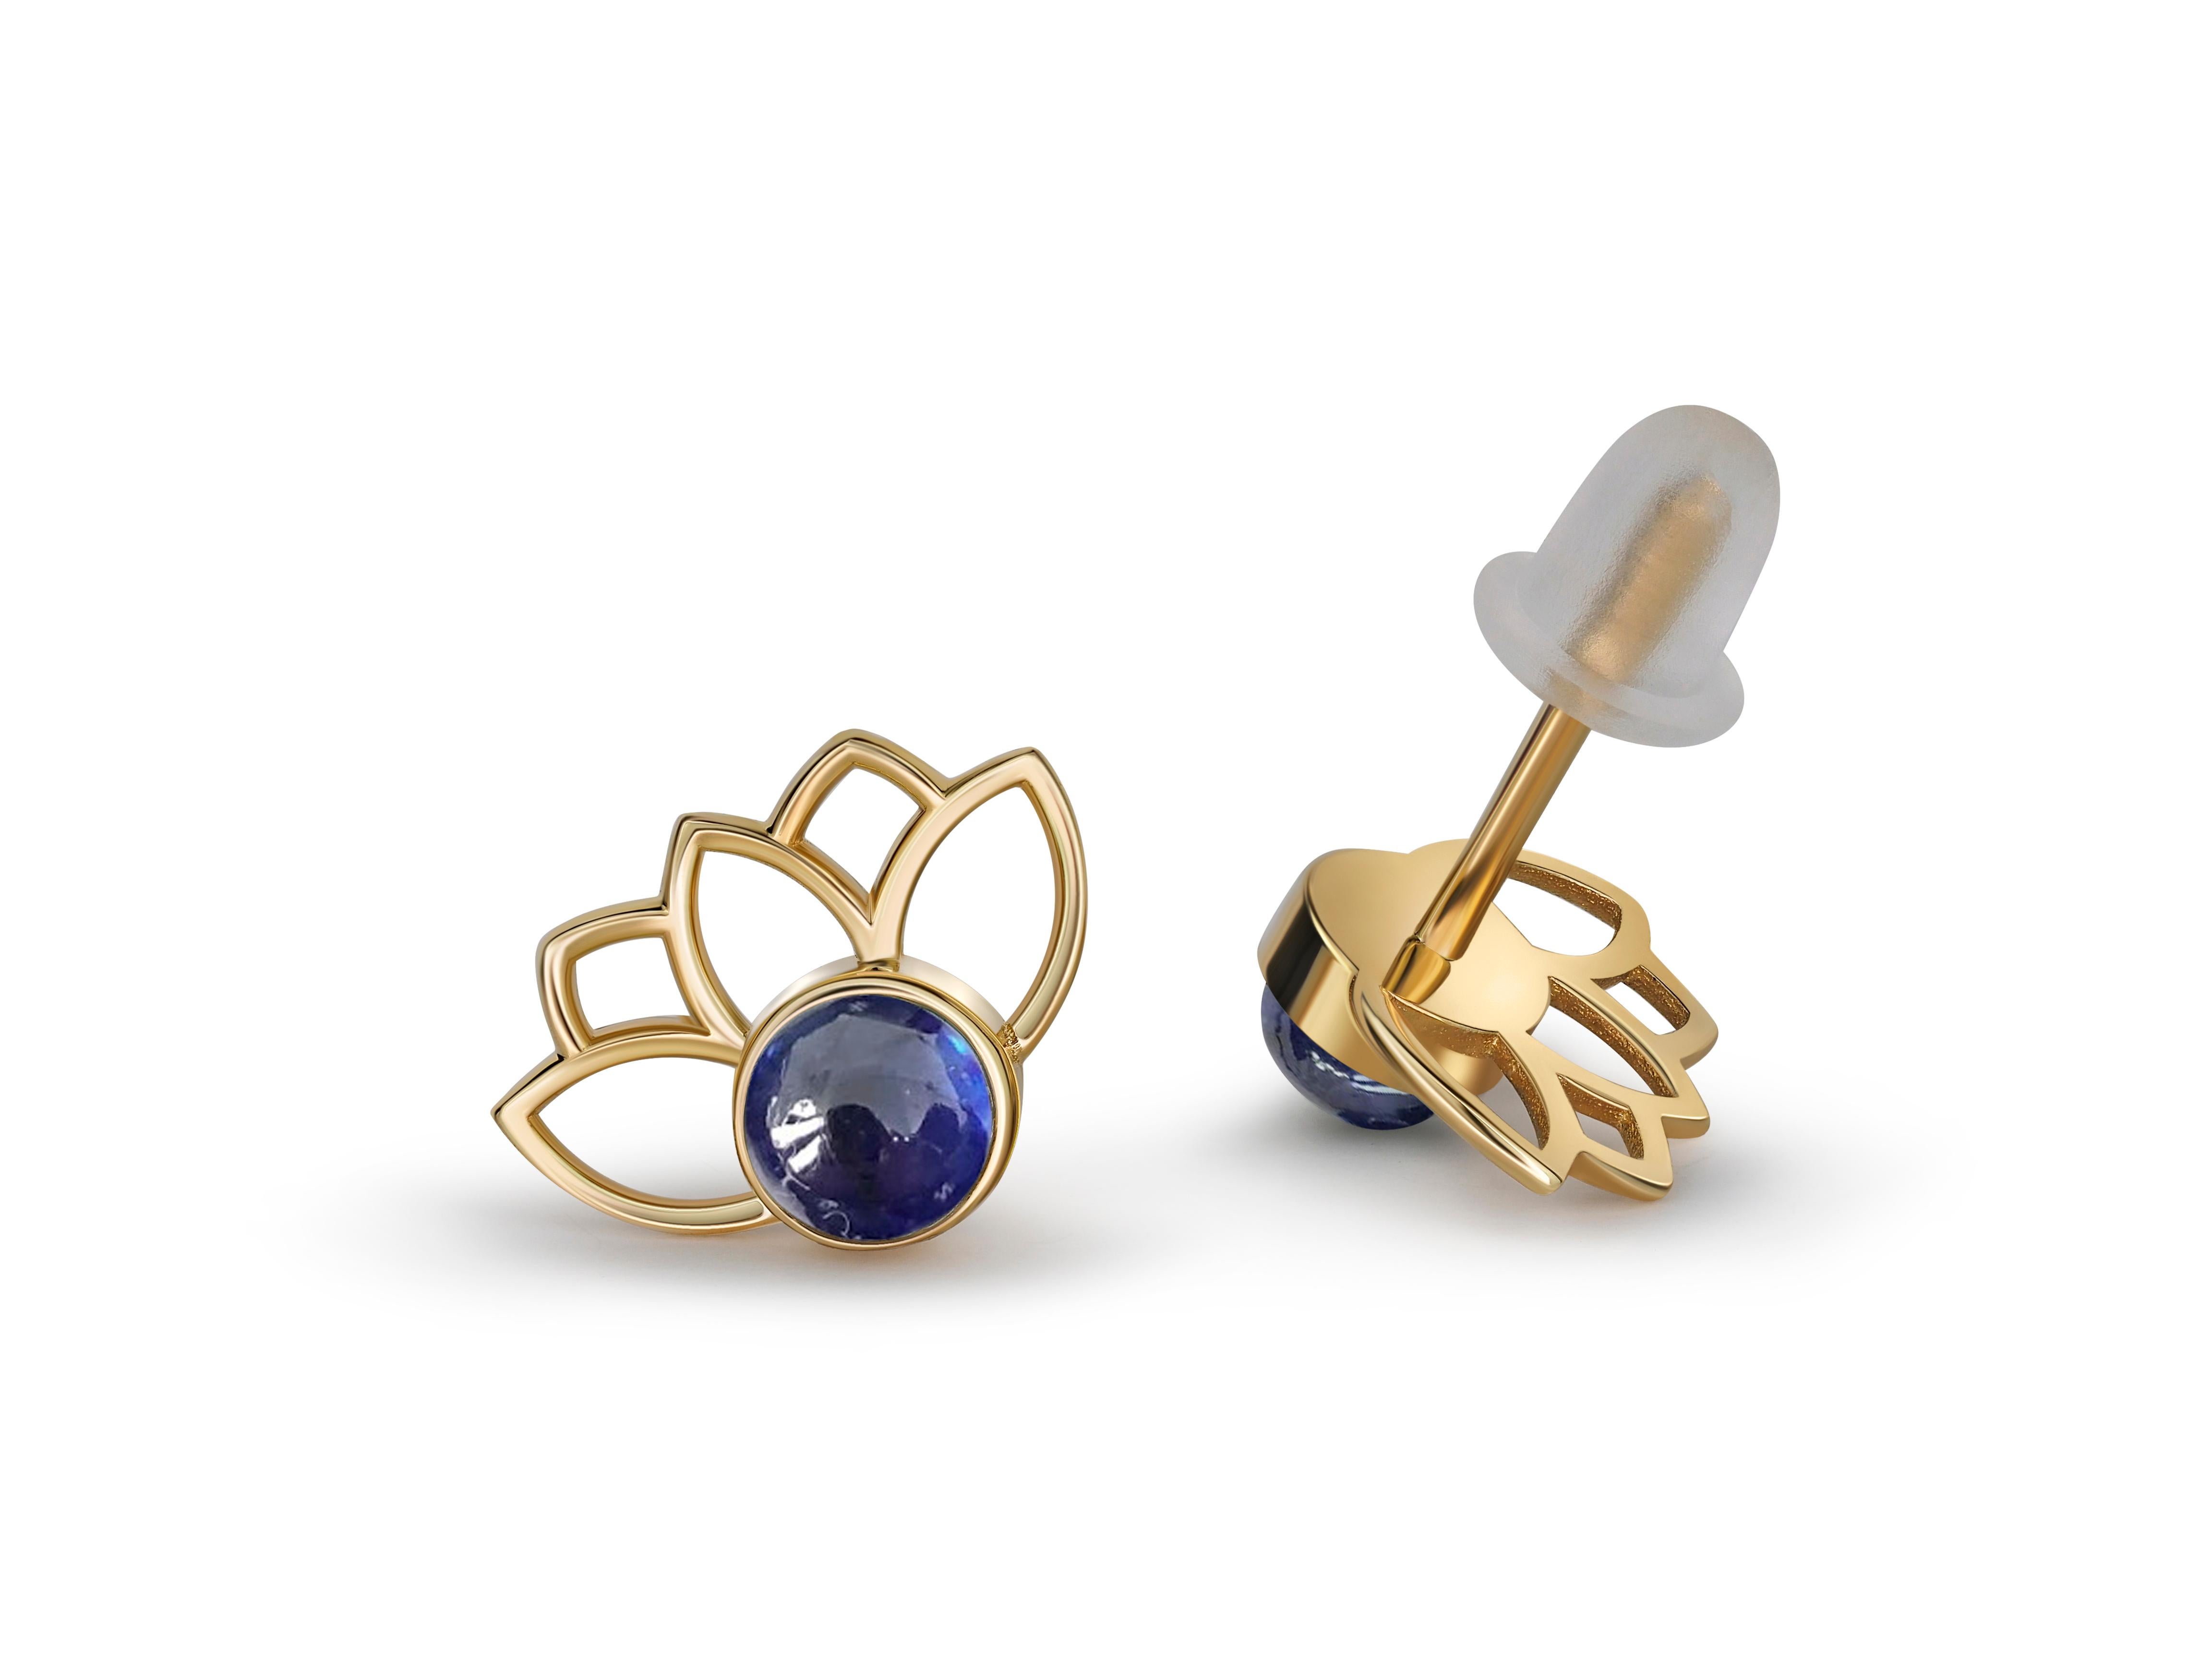 Cabochon Lotus Earrings Studs with Sapphires in 14k Gold, Blue Sapphire Gold Earrings For Sale